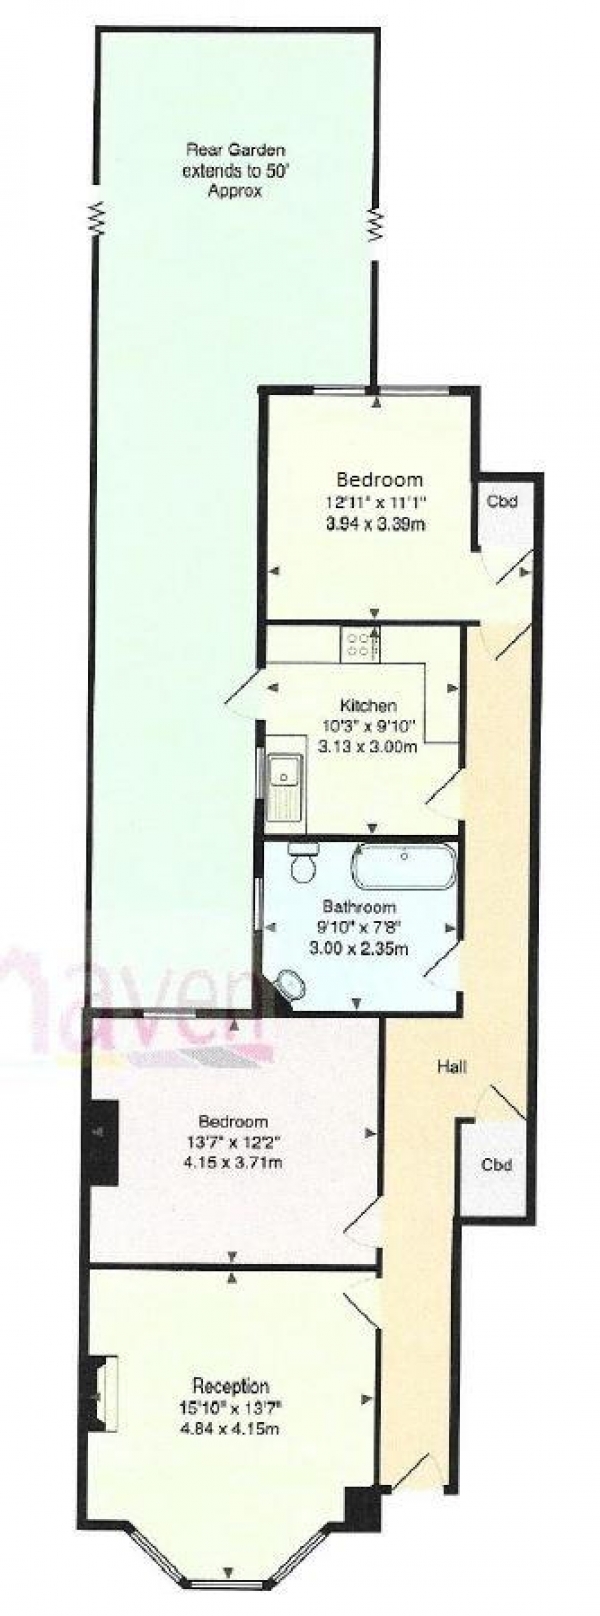 Floor Plan Image for 2 Bedroom Flat for Sale in Sedgemere Avenue, East Finchley, N2